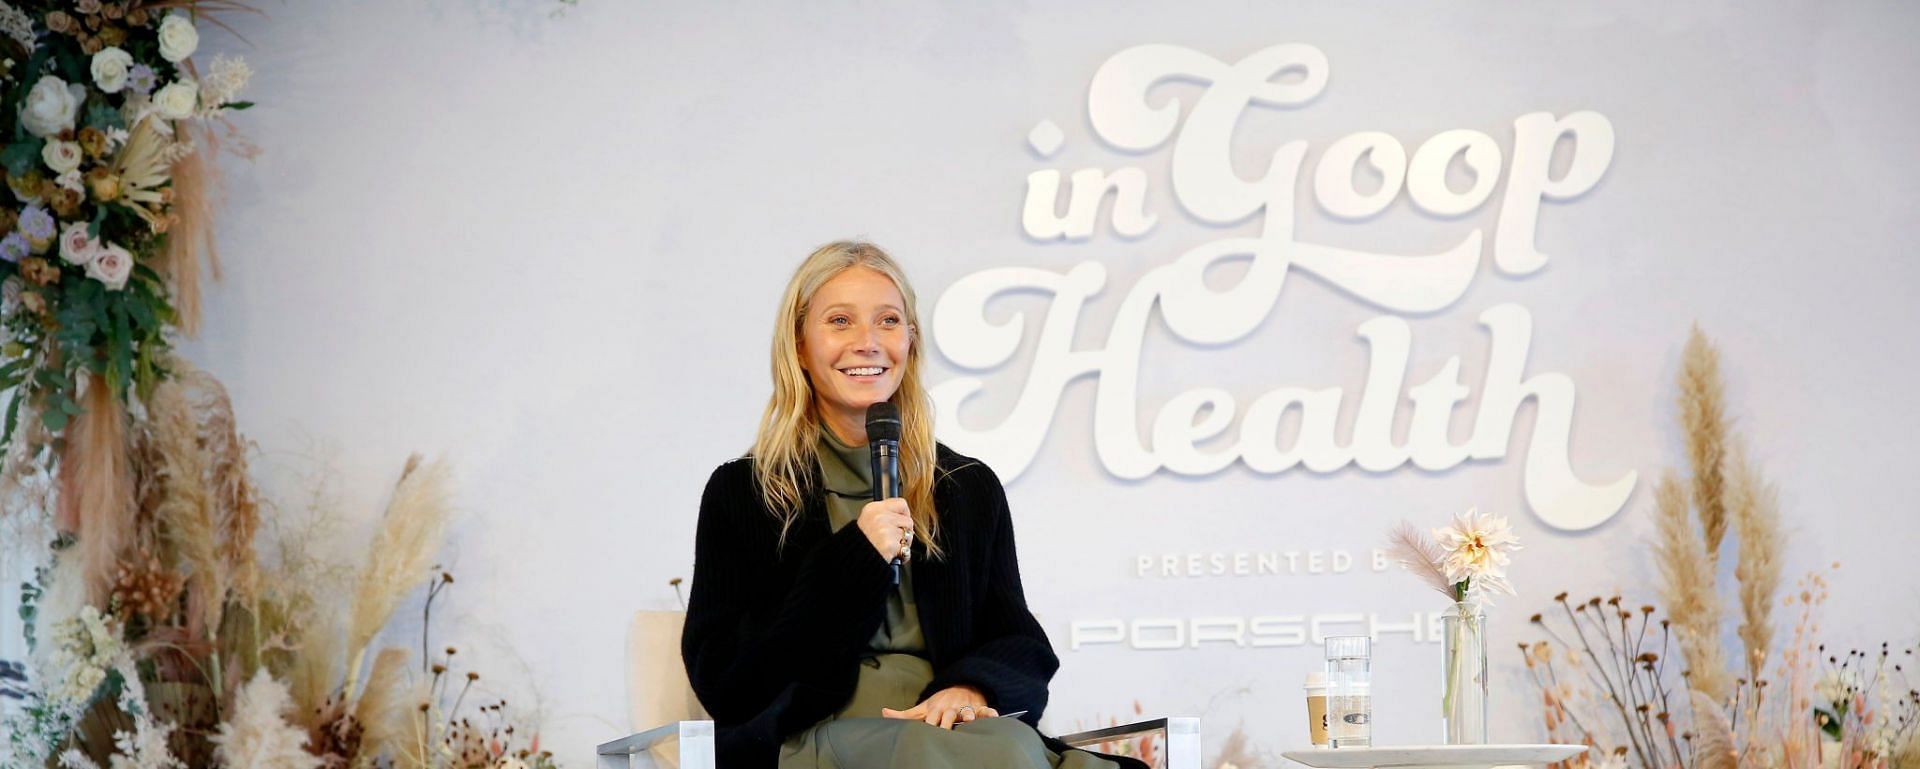 Gwyneth Paltrow's bizarre 'we lost half a day skiing' quote goes viral